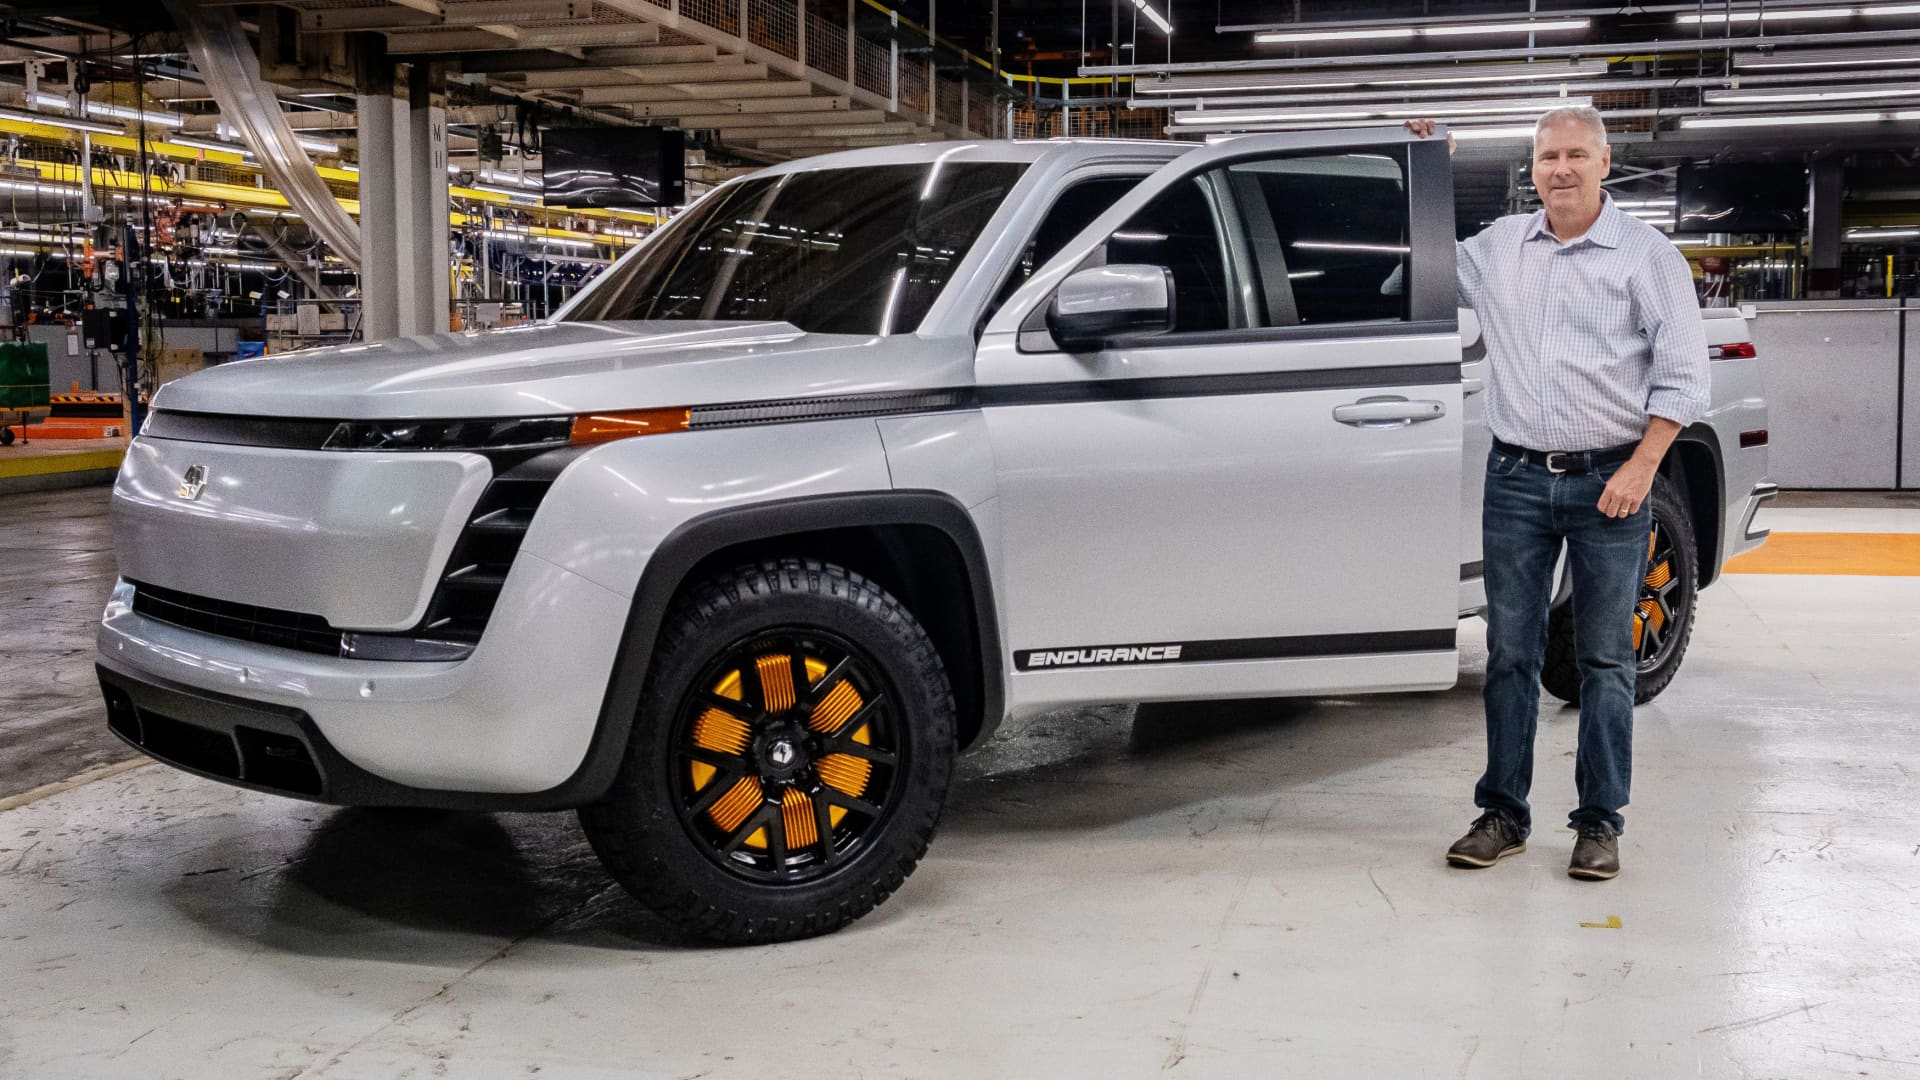 Lordstown Motors Corp Chief Executive Steve Burns poses with a prototype of the electric vehicle start-up's Endurance pickup truck, which it will begin building in the second half of 2021, at the company's plant in Lordstown, Ohio, U.S. June 25, 2020.